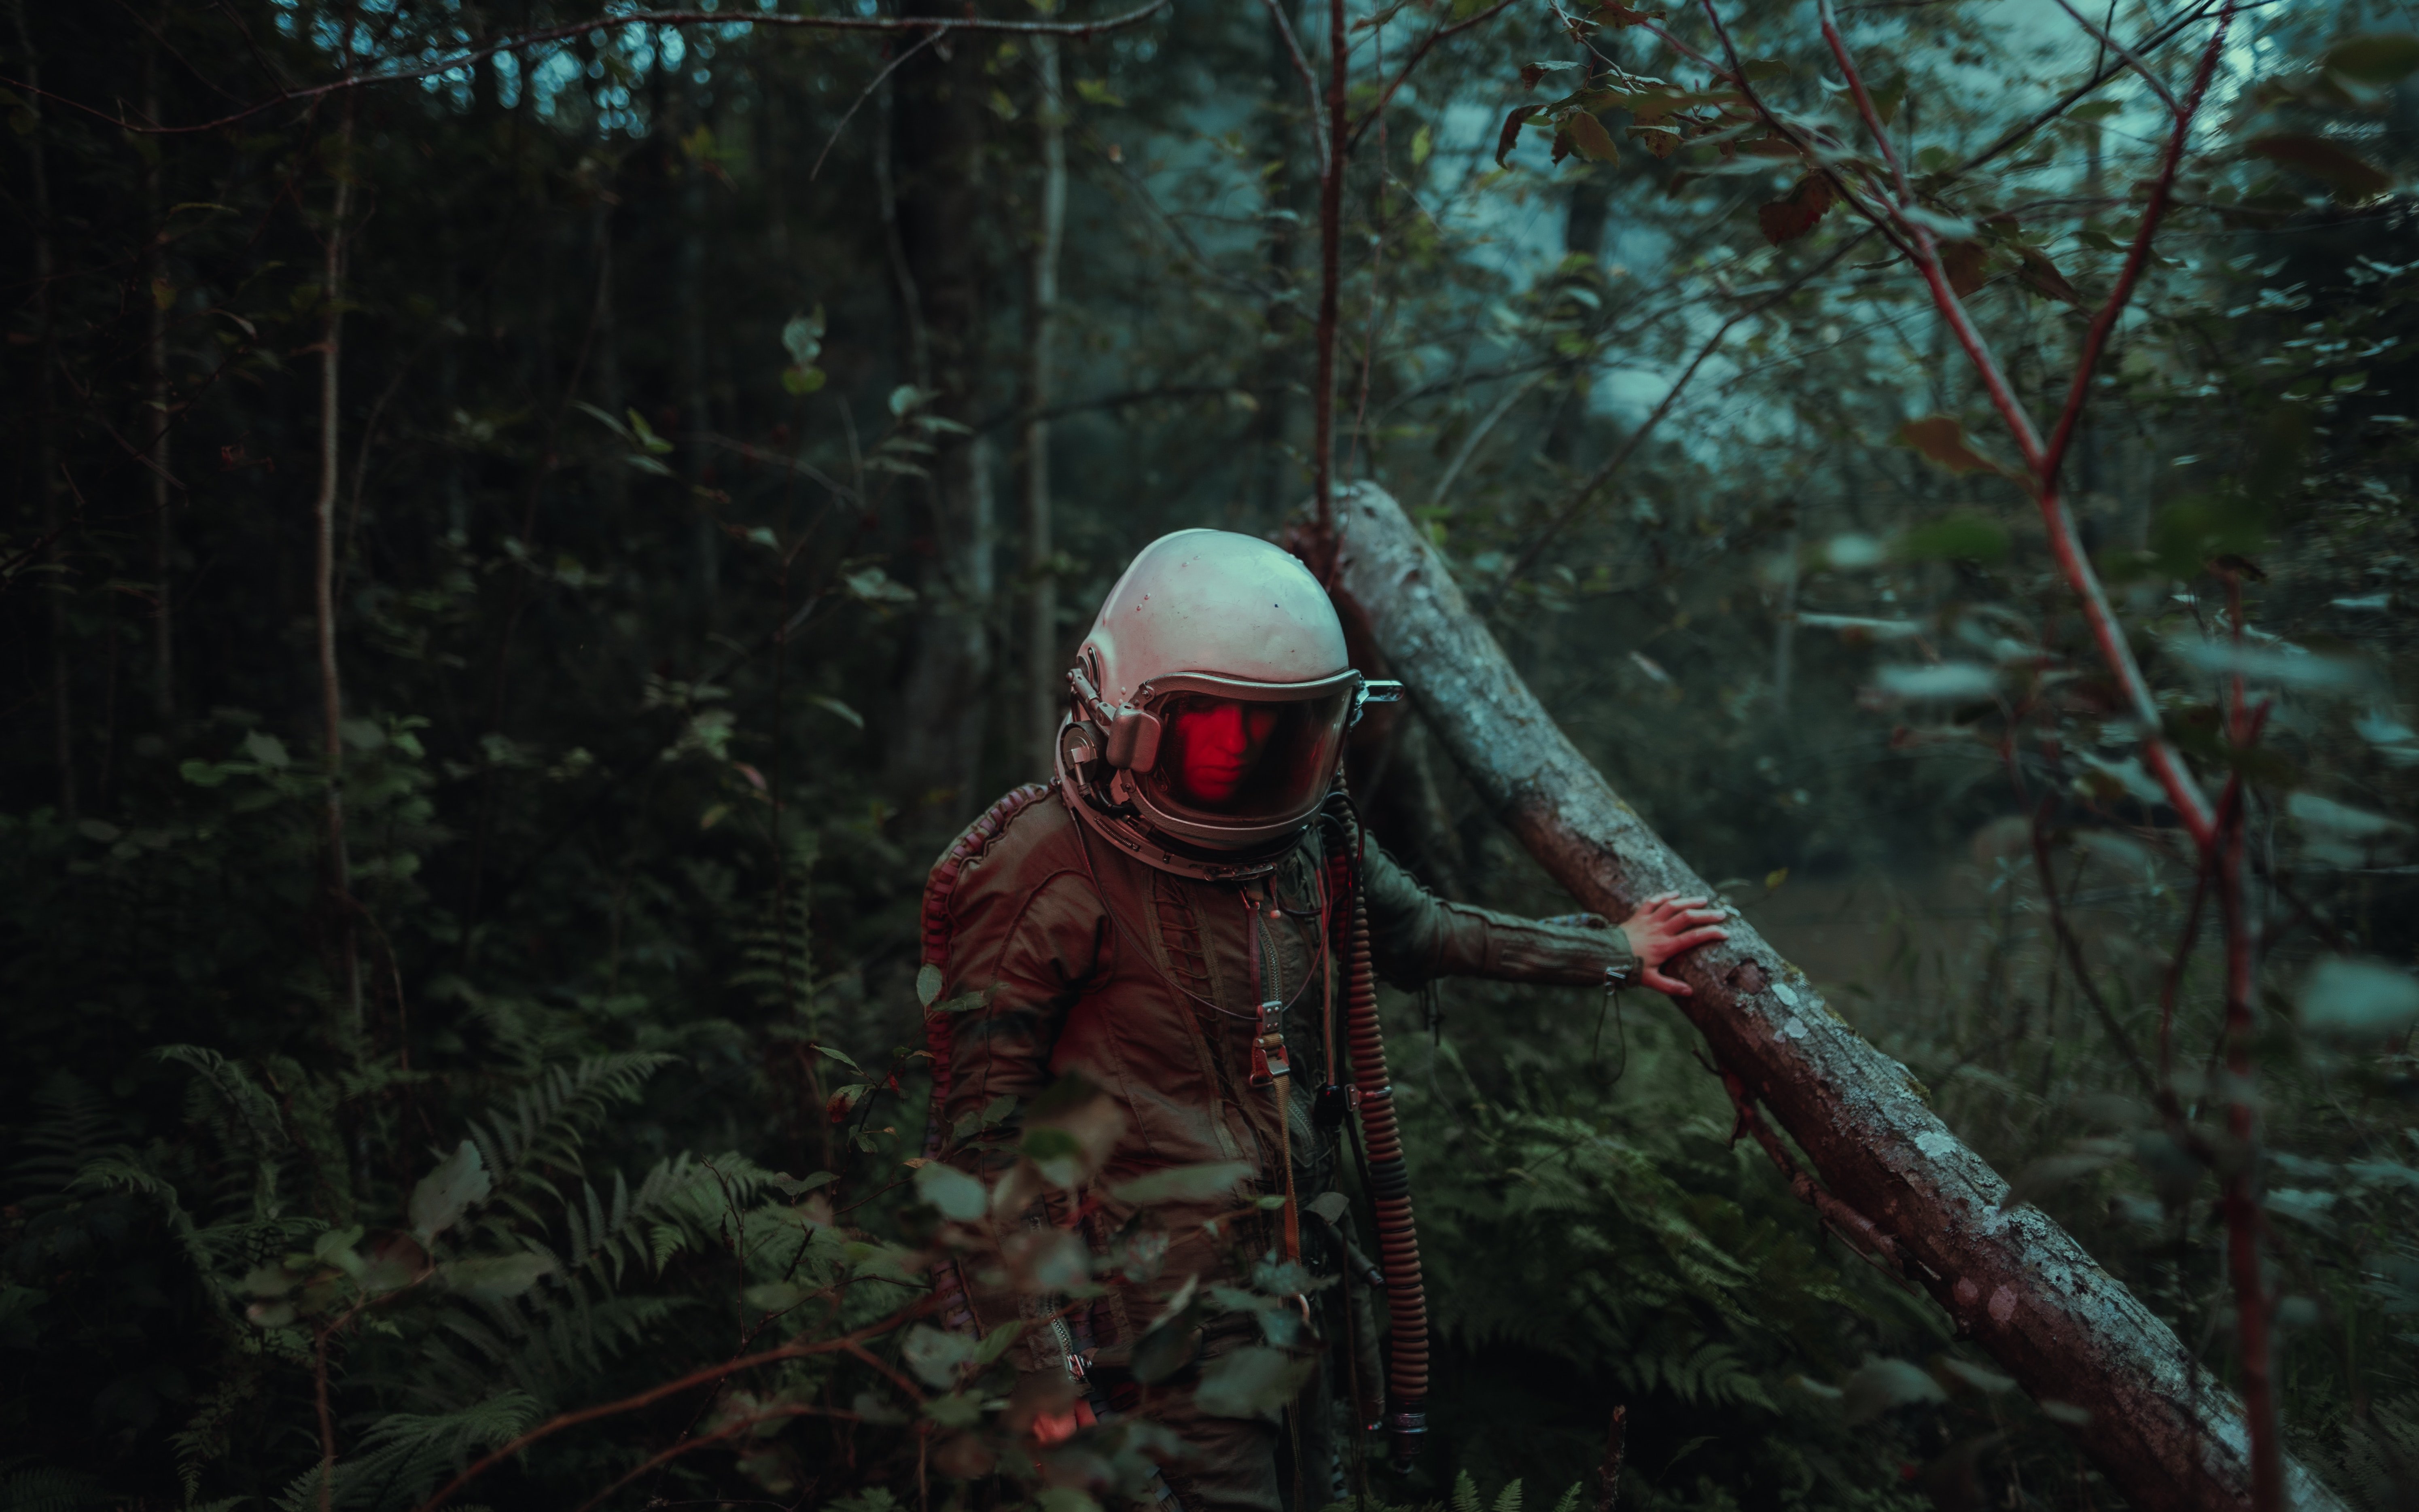 An astronaut in a dirty, old suit and a red tinted visor, walking through a dark forest, holding onto a tumbled tree.